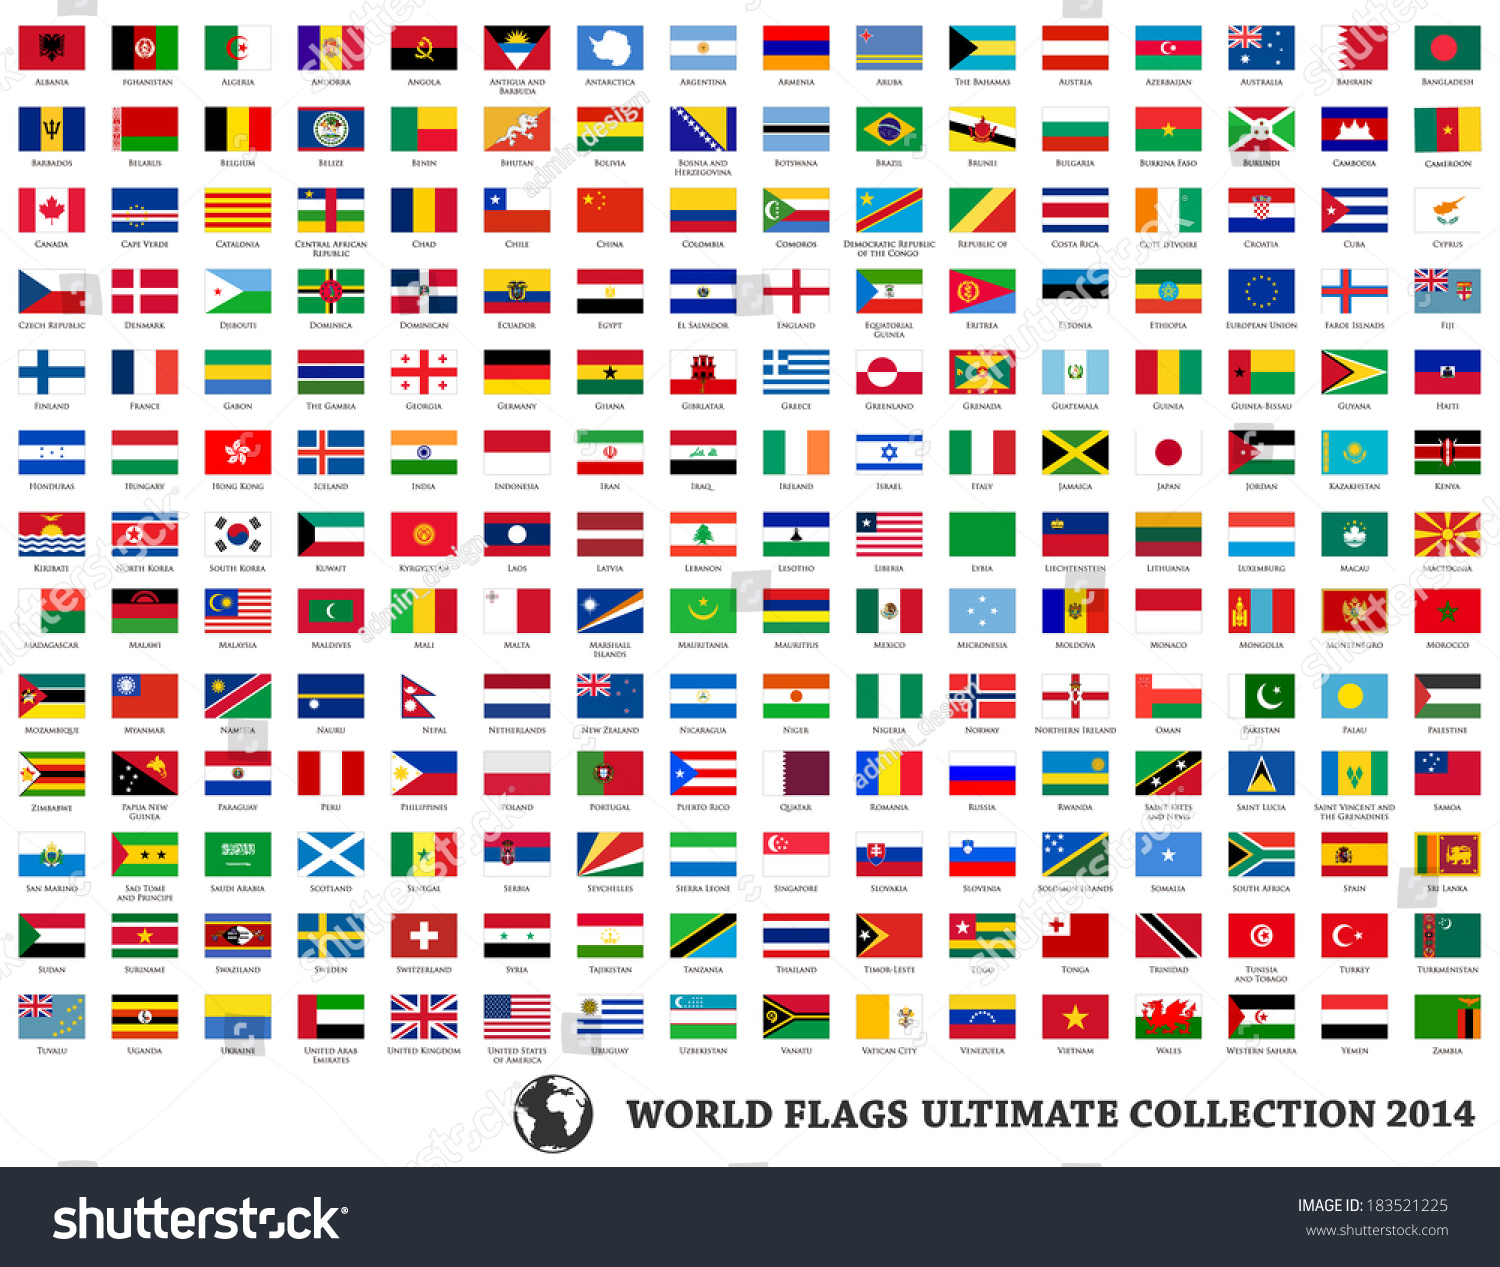 Flags Vector Of The World - 183521225 : Shutterstock